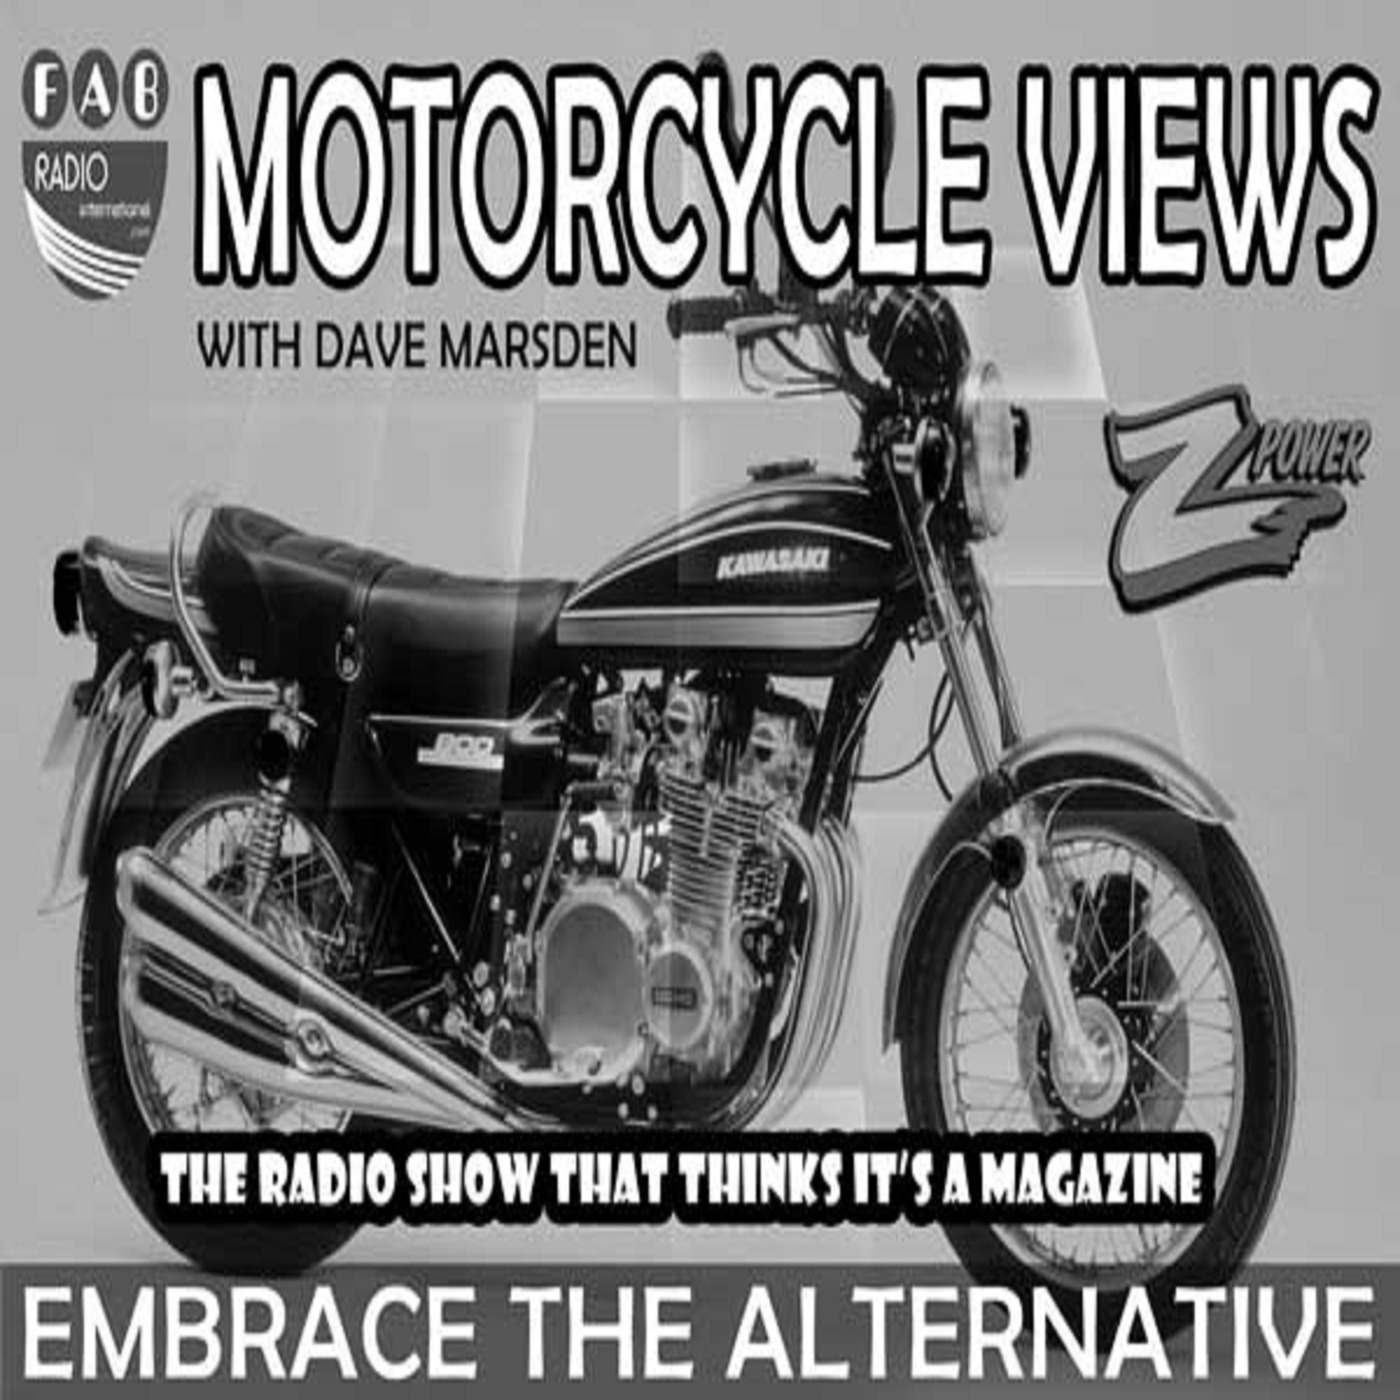 Motorcycle views with Dave Marsden Series 1, Episode 1